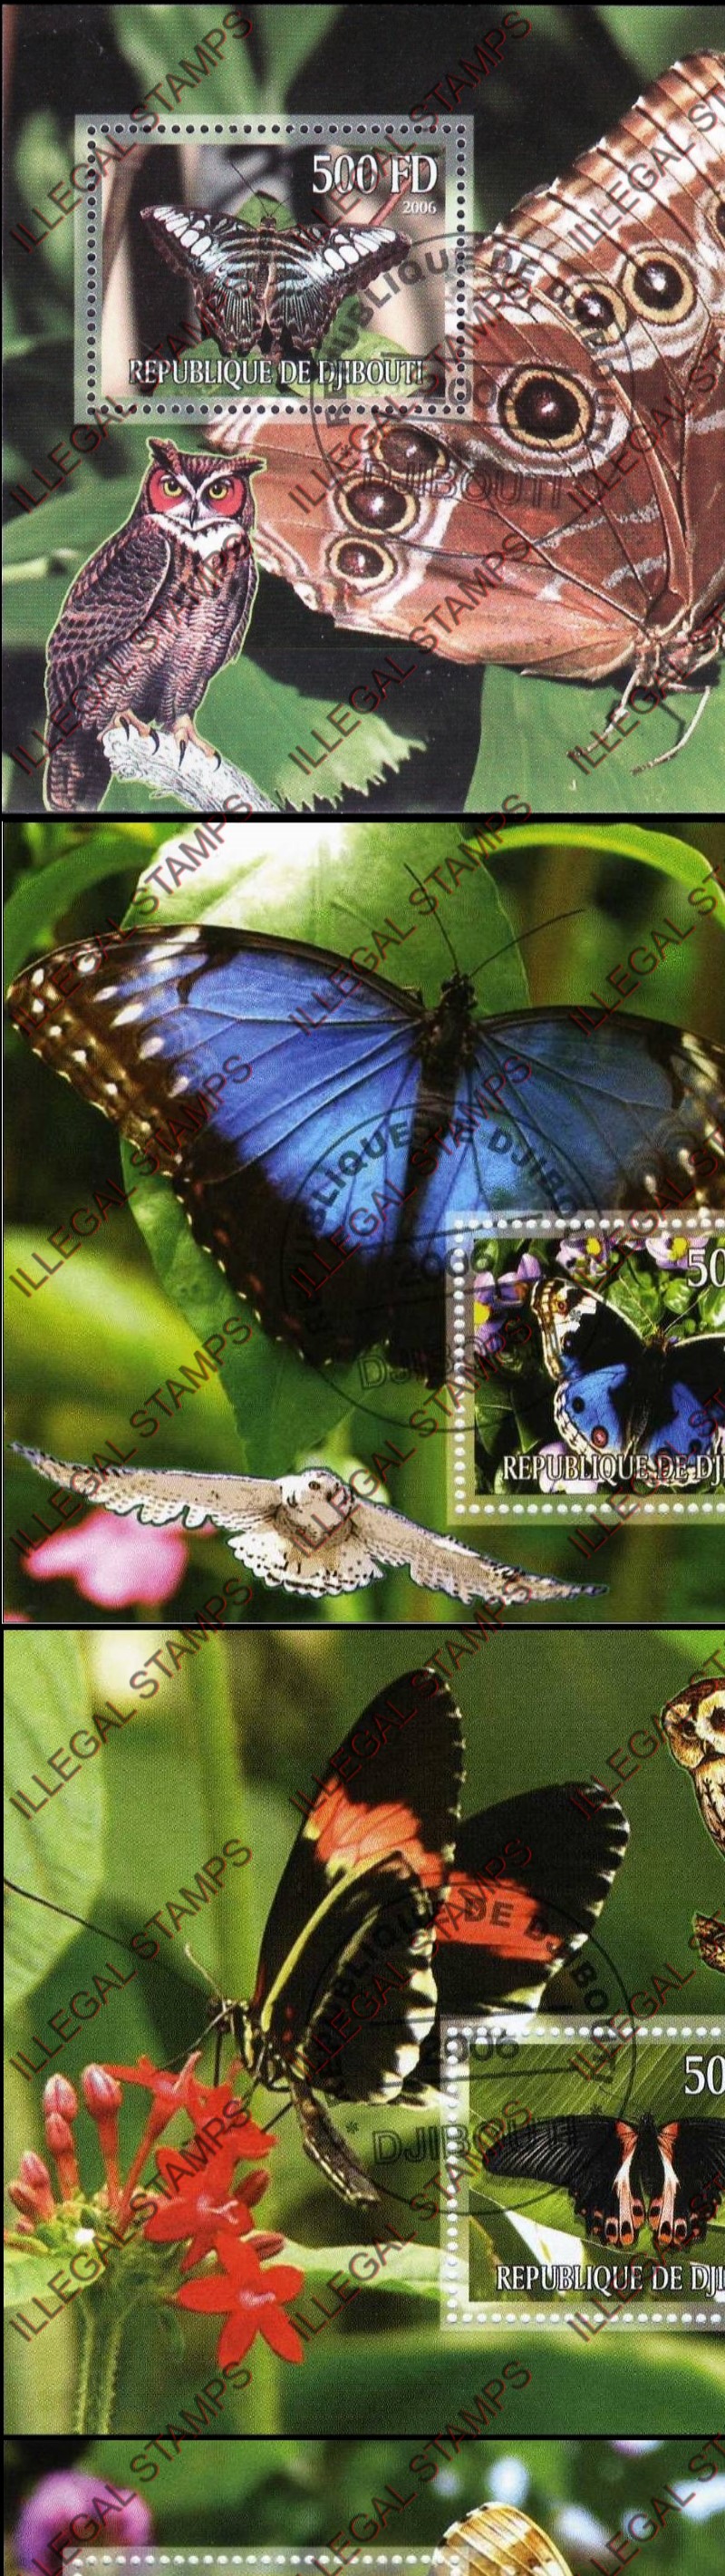 Djibouti 2006 Butterflies and Owls Illegal Stamp Souvenir Sheets of 1